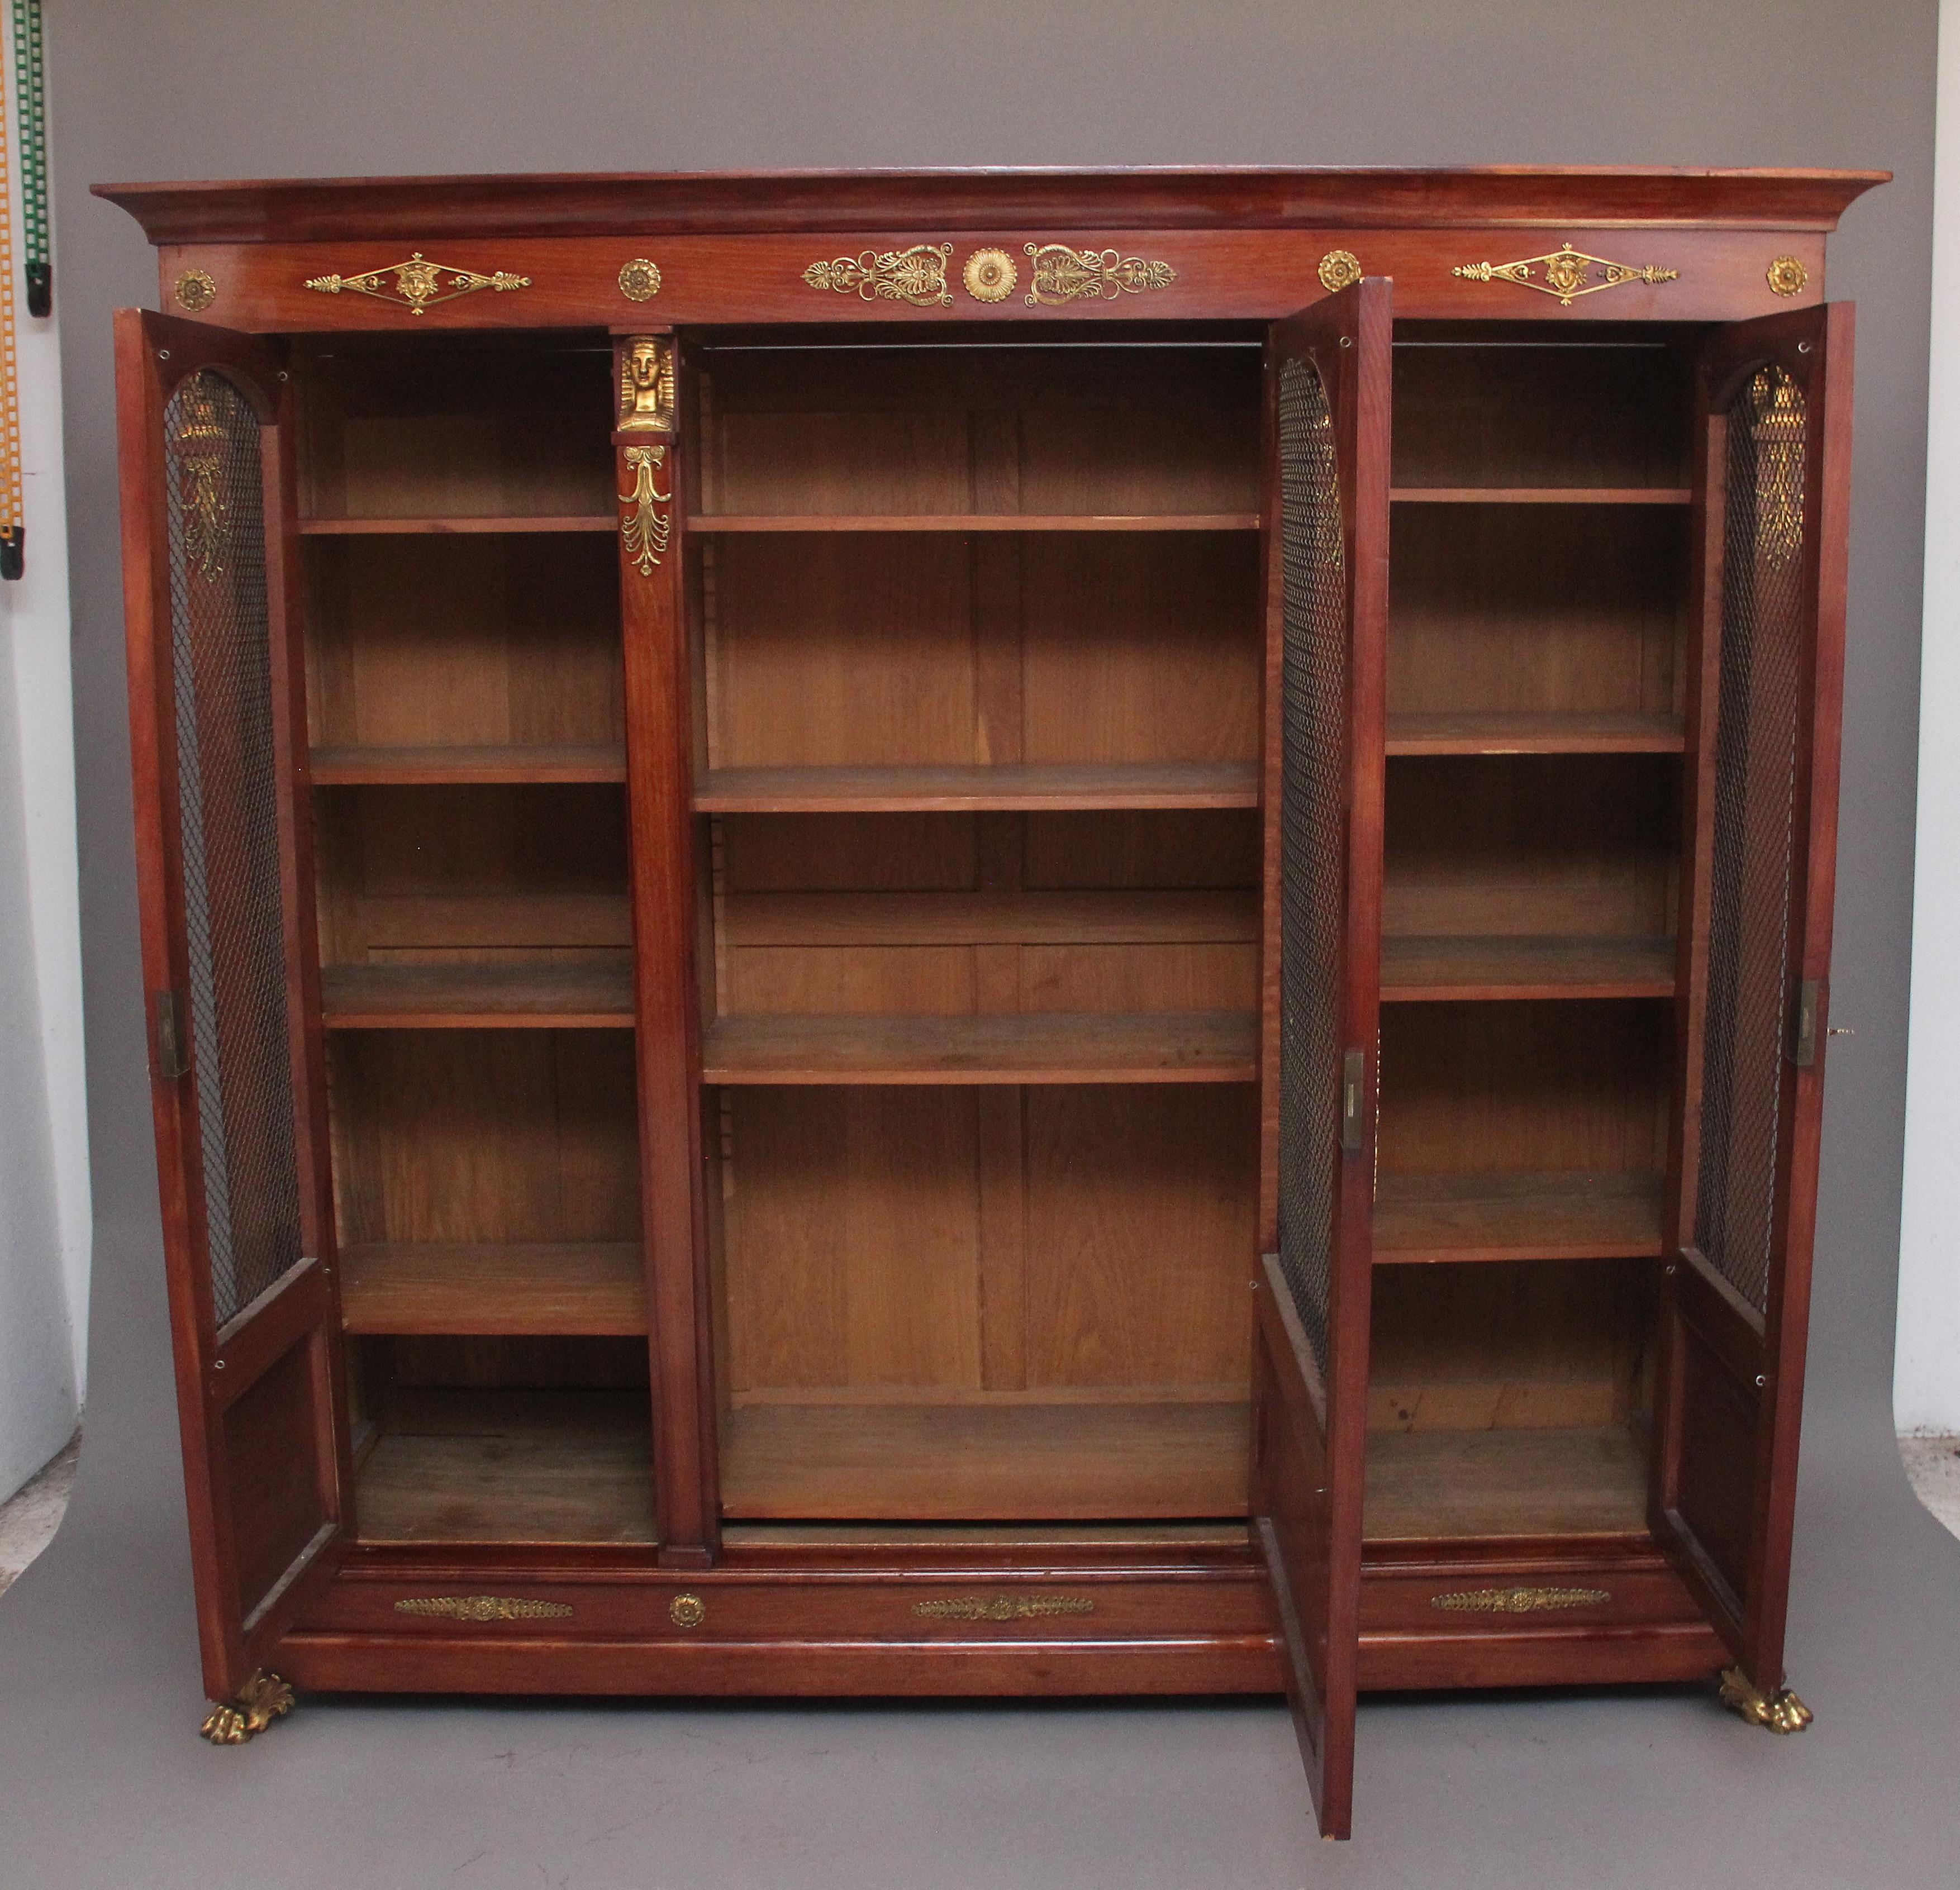 A superb quality 19th Century French mahogany bookcase in the empire style, the shaped cornice above three moulded arched doors with wire grills opening to reveal four adjustable shelves in each section, each door front having a panel at the bottom